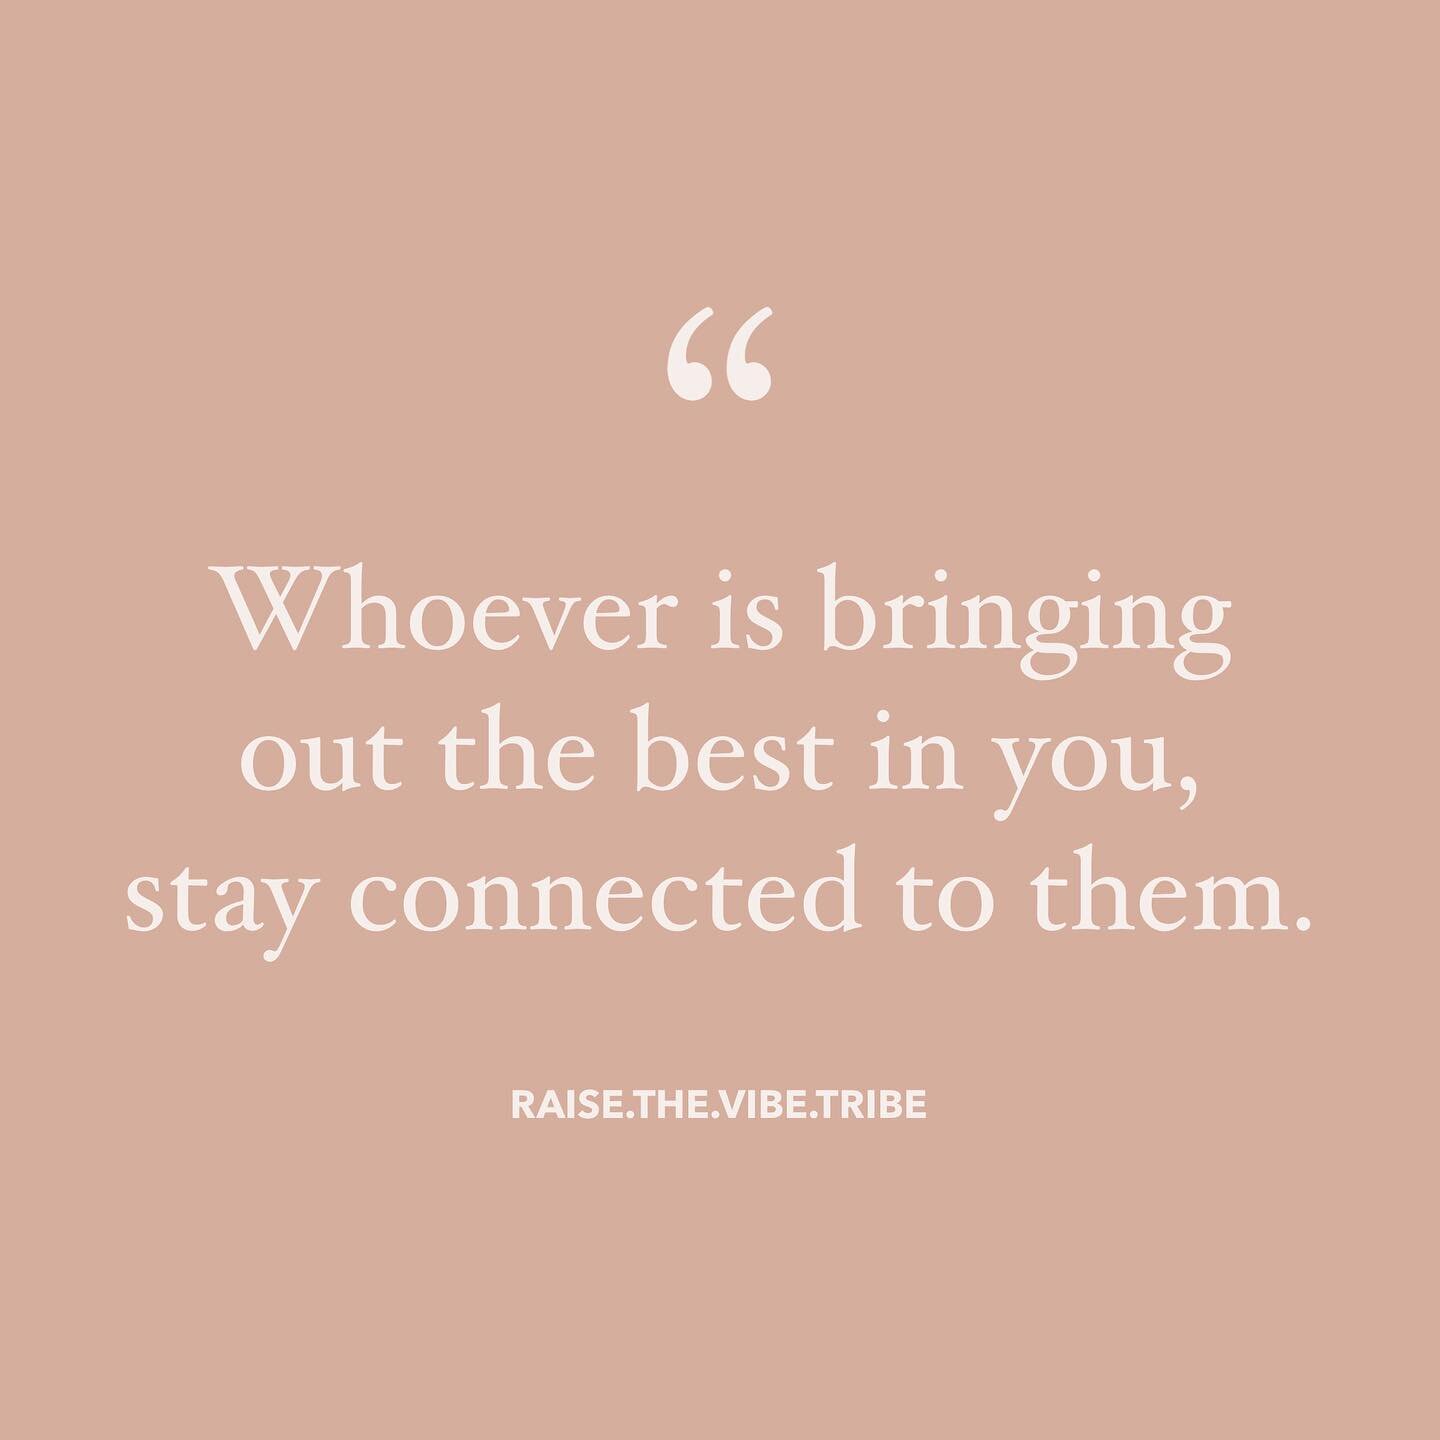 &gt; I like to think of myself as the &ldquo;good friend&rdquo;&hellip; you know the one that doesn&rsquo;t get you into trouble. Although, some would probably argue otherwise haha 😇 😈 

Words of wisdom spotted on @raise.the.vibe.tribe&rsquo;s page